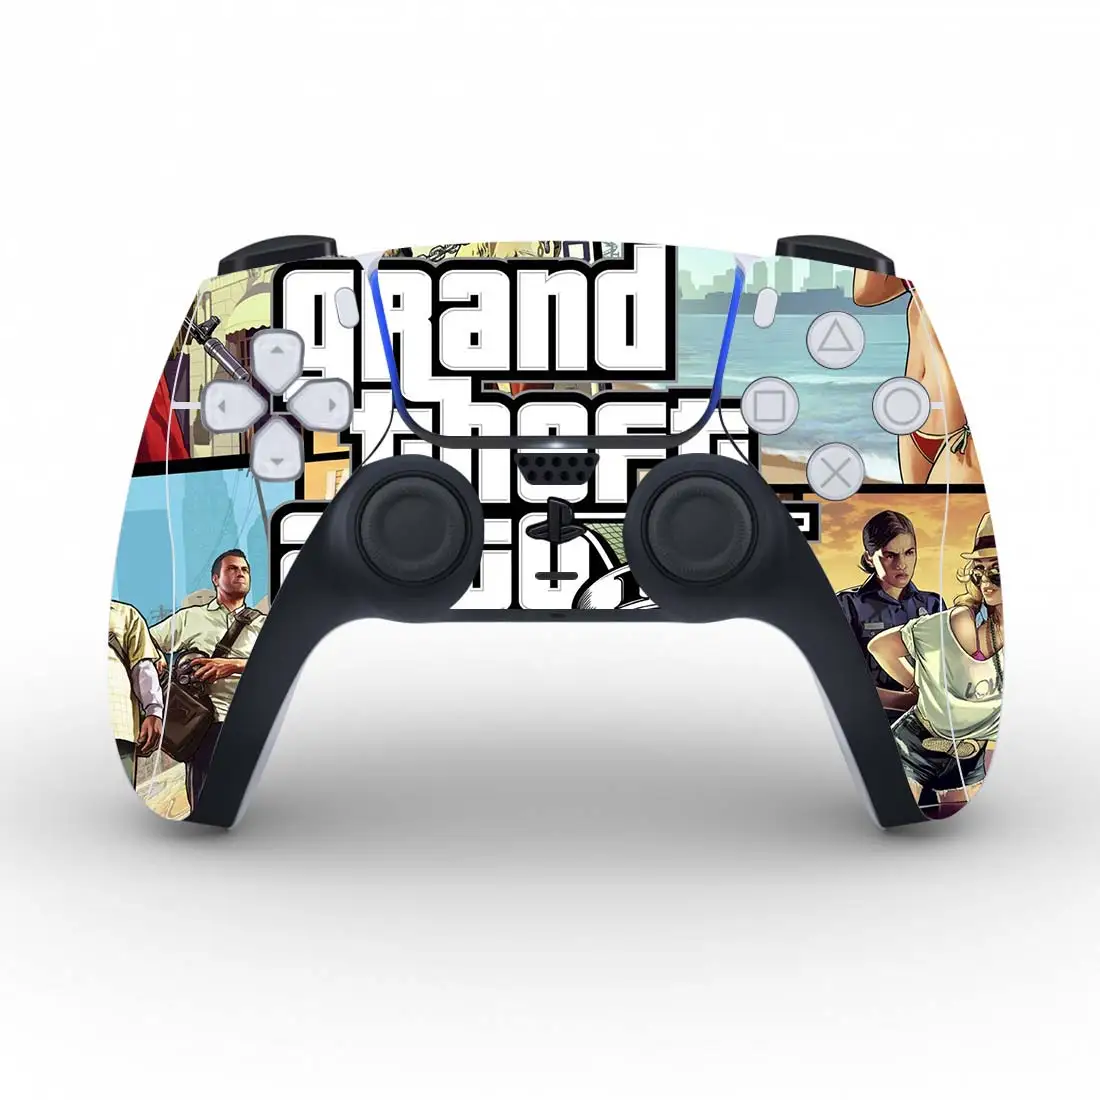 Grand Theft Auto Gta Cover Sticker For Ps5 Skin For Playstation 5 Gamepad Joystick Decal Skin Sticker Vinyl - Stickers - AliExpress